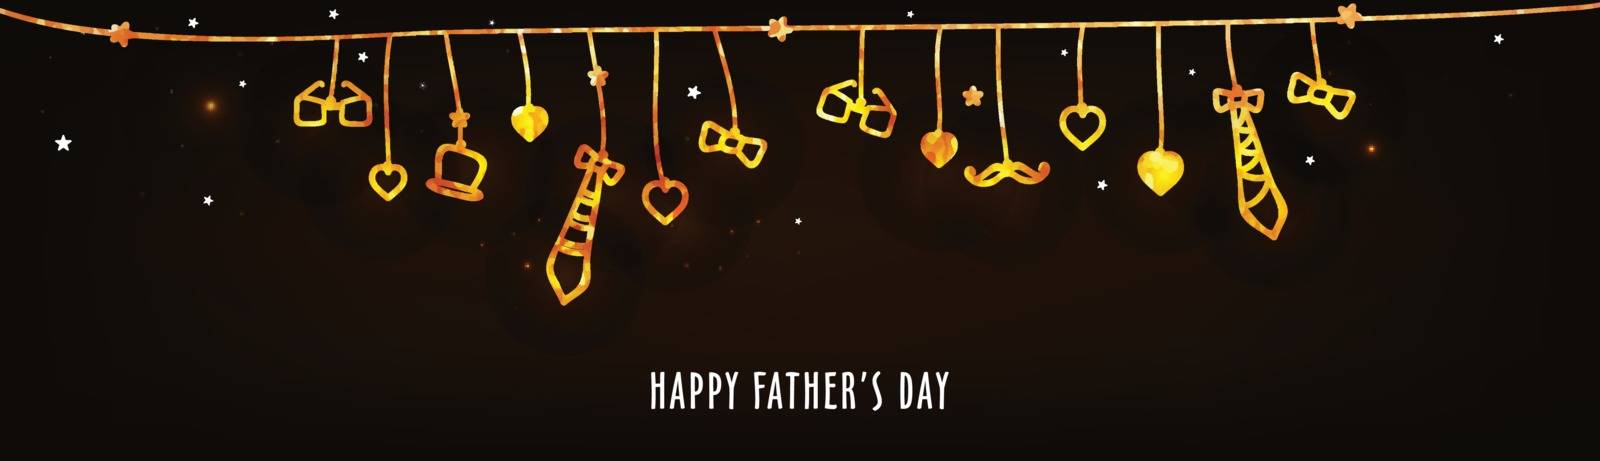 Happy Father's Day banner design decorated with hand drawn doodle style elements.